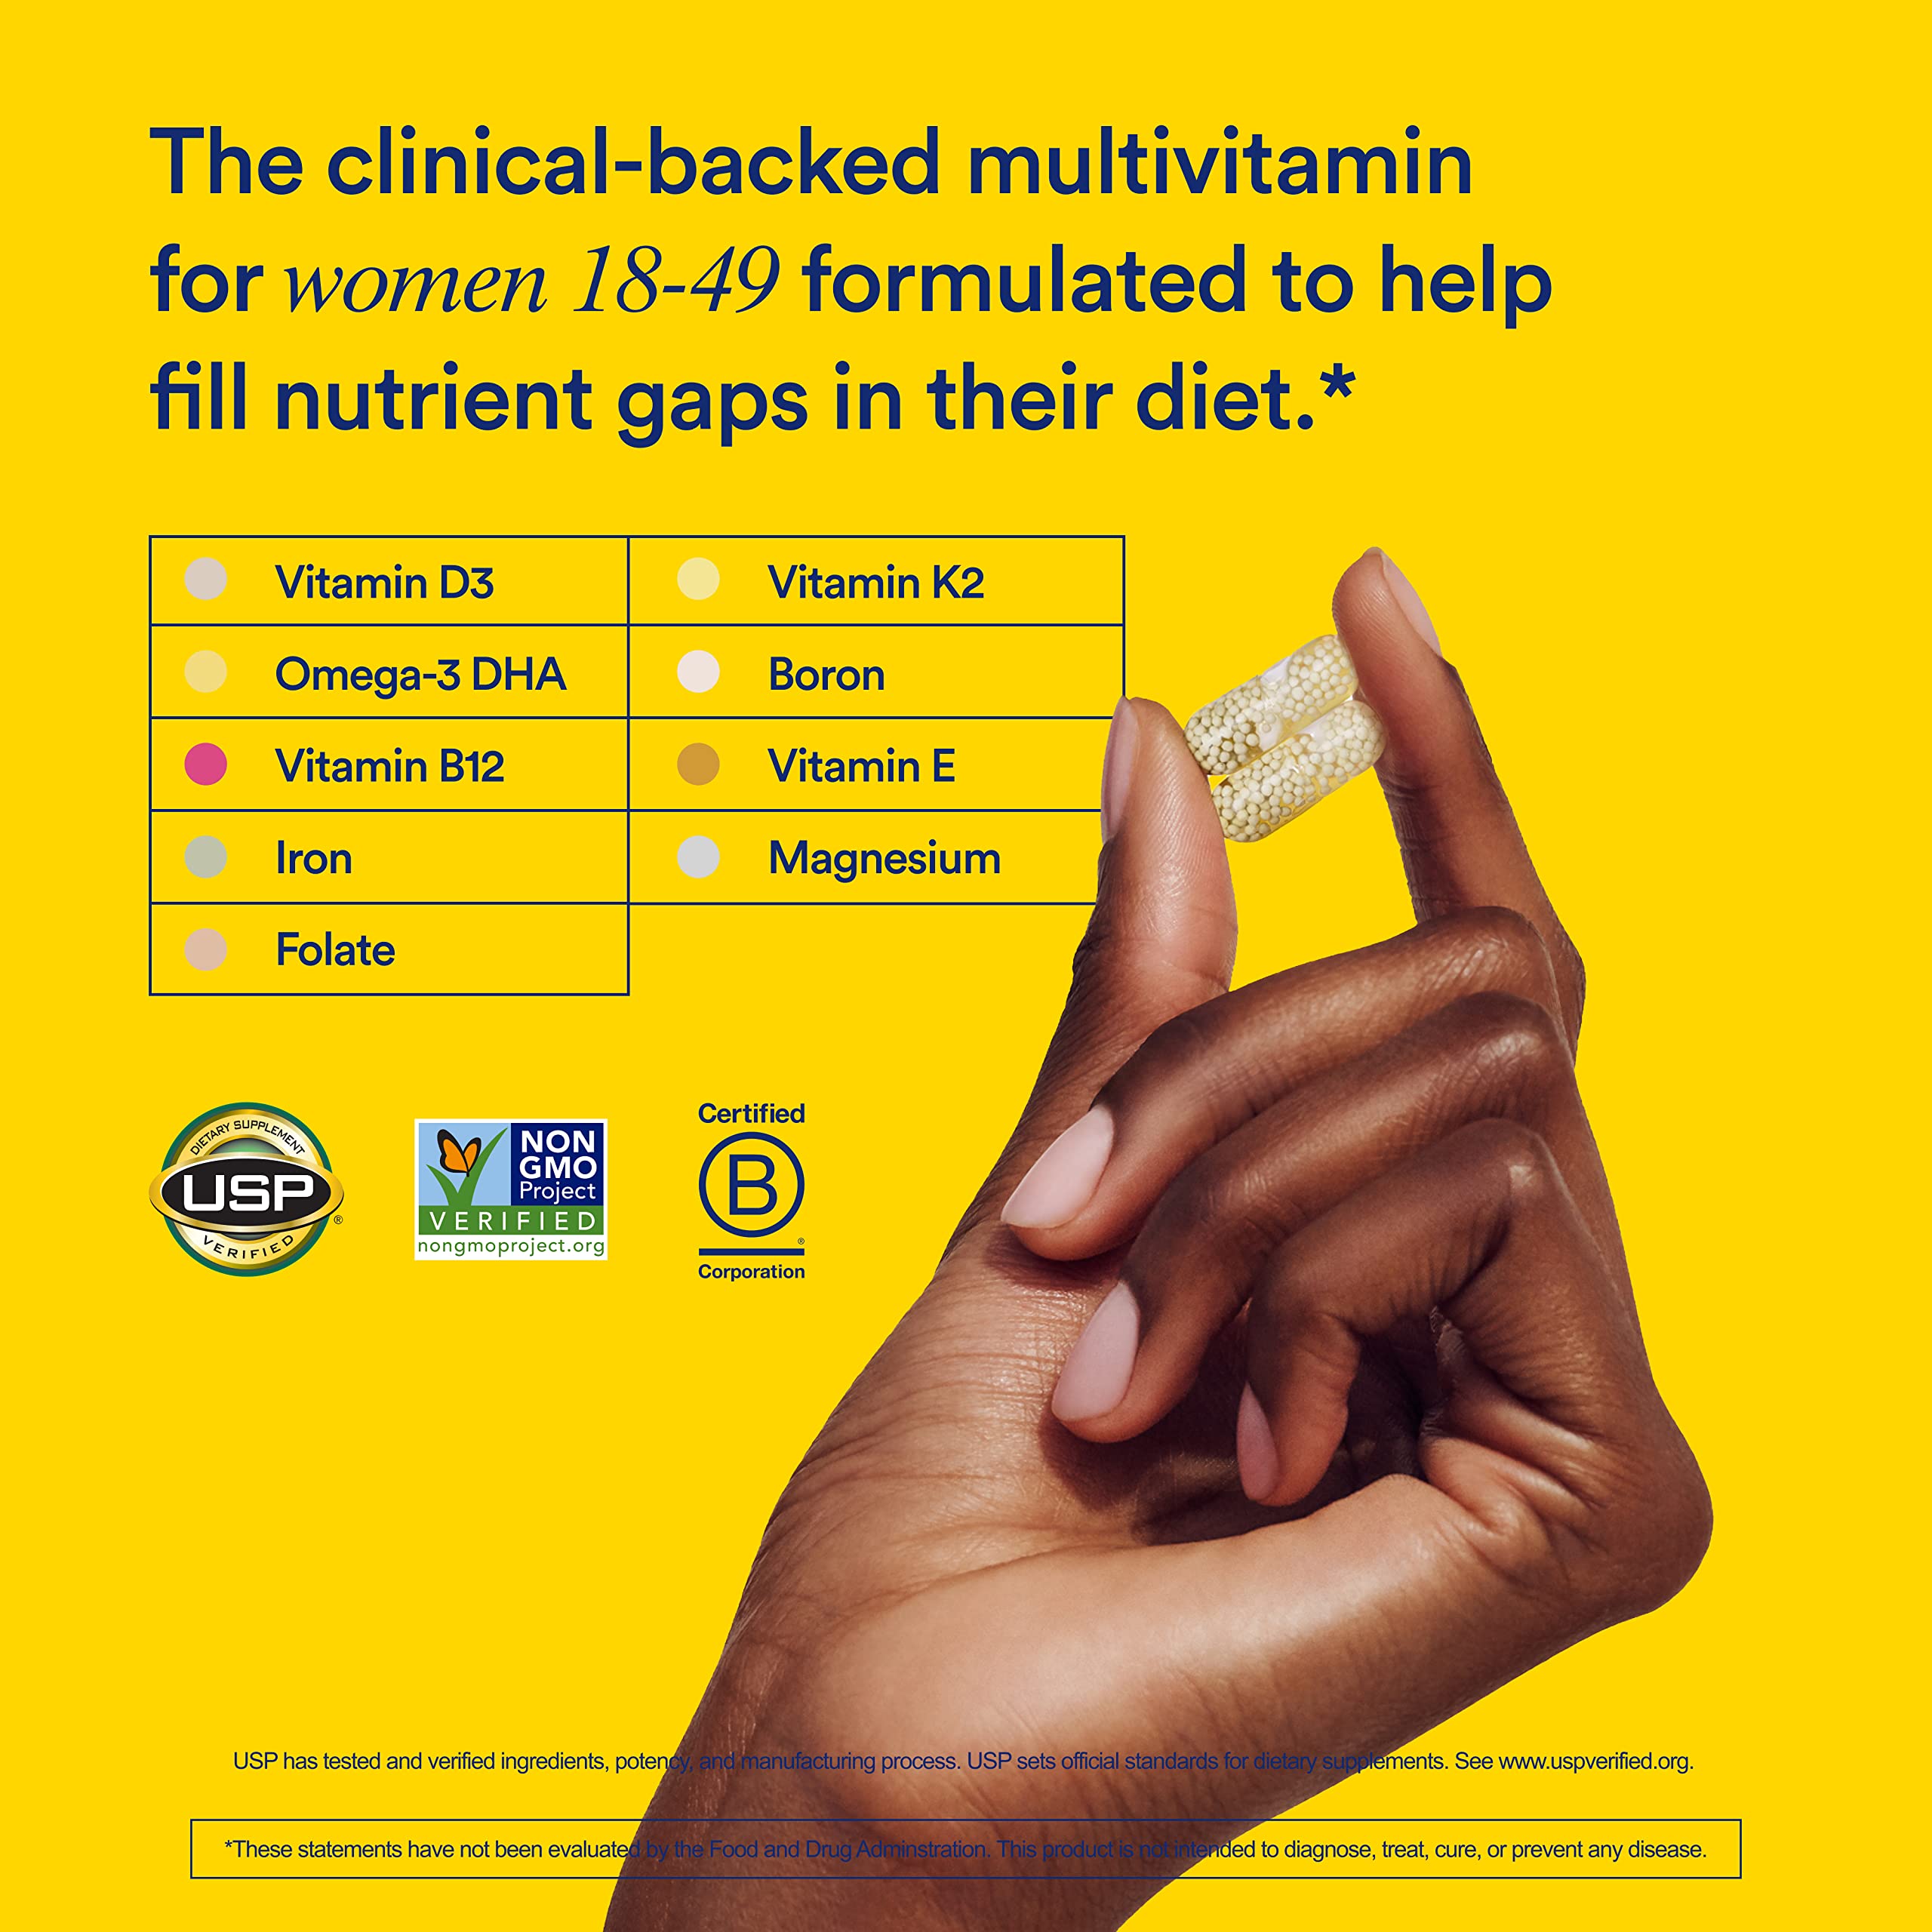 Ritual Multivitamin for Women 18+, Clinical-Backed Multivitamin with Vitamin D3 for Immune Support*, Vegan Omega 3 DHA, B12, Iron, Gluten Free, Non GMO, USP Verifed, 30 Day Supply, 60 Capsules